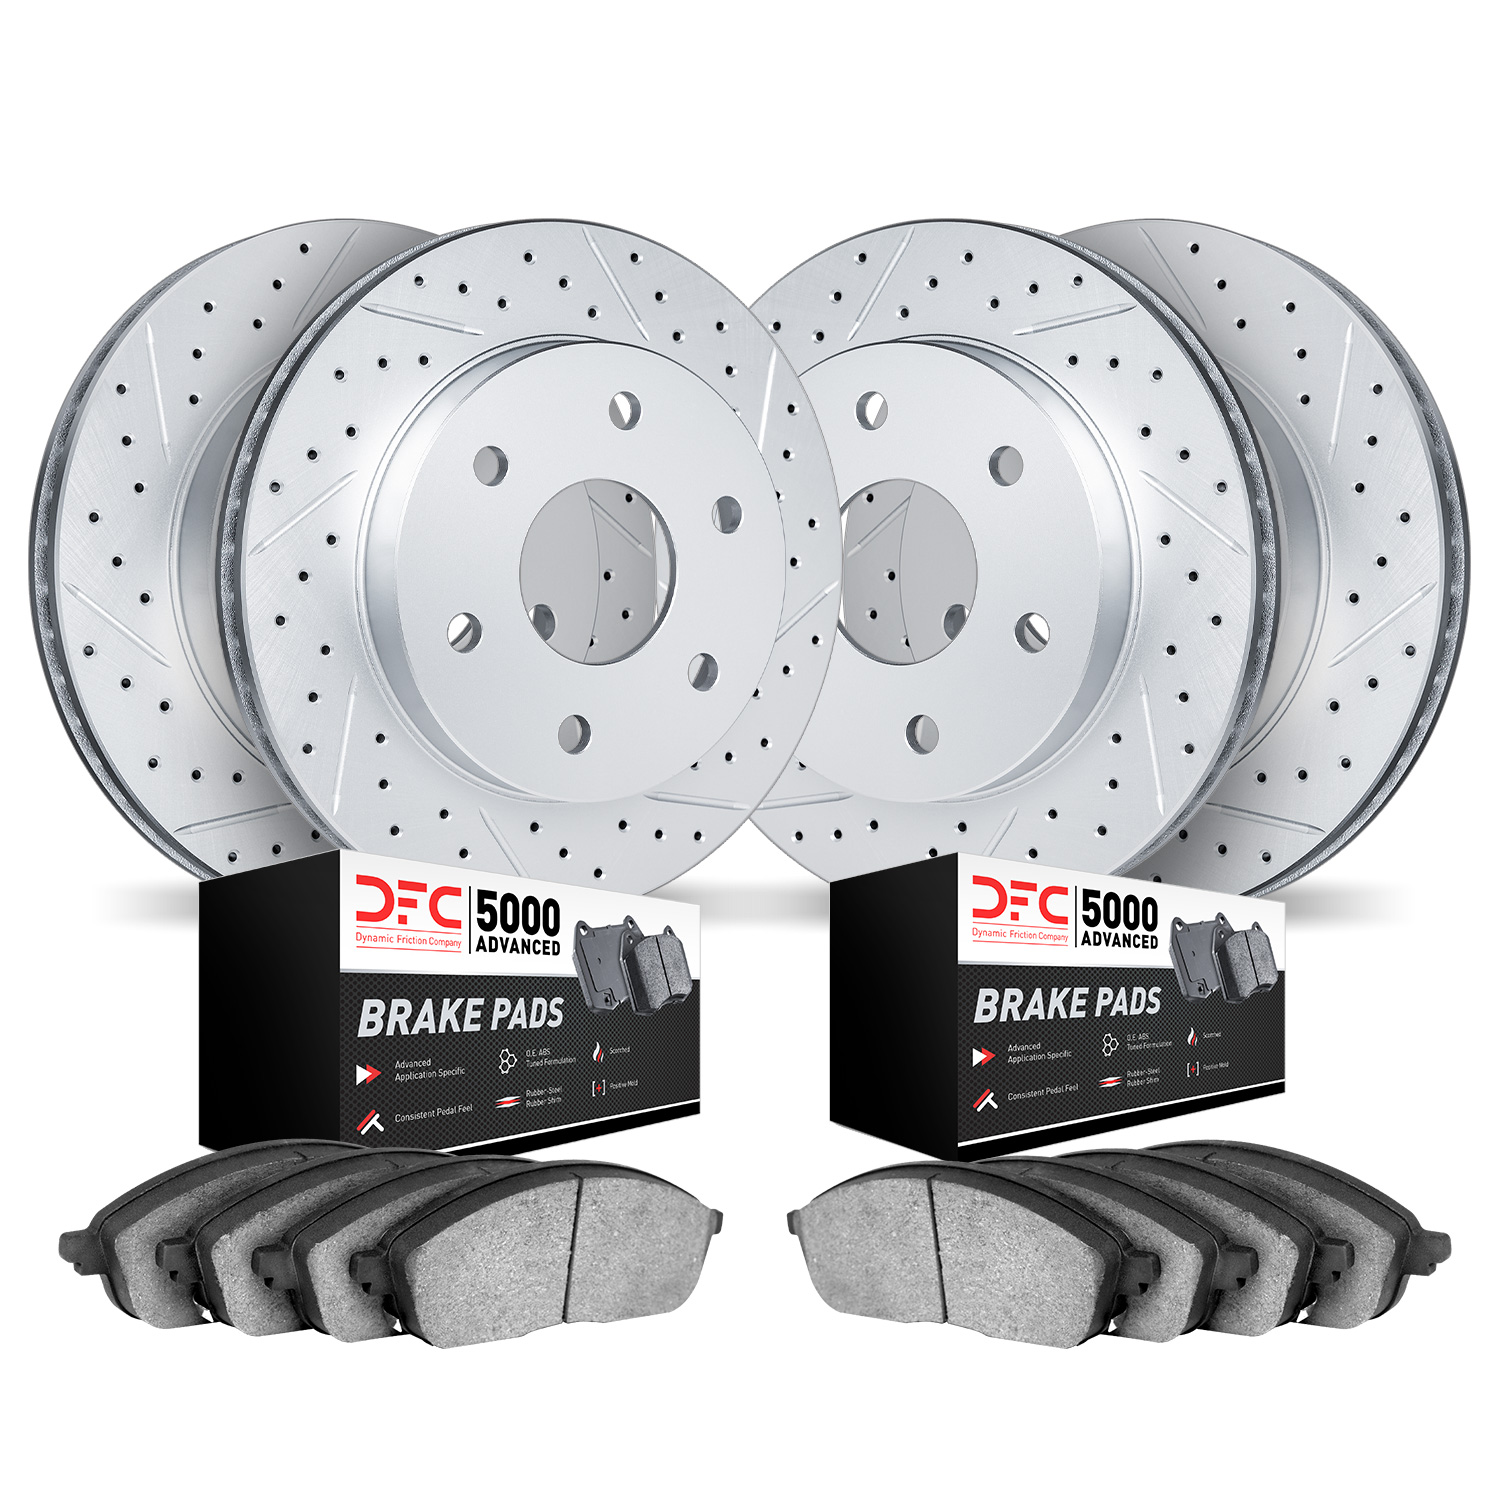 2504-54264 Geoperformance Drilled/Slotted Rotors w/5000 Advanced Brake Pads Kit, 2004-2008 Ford/Lincoln/Mercury/Mazda, Position: